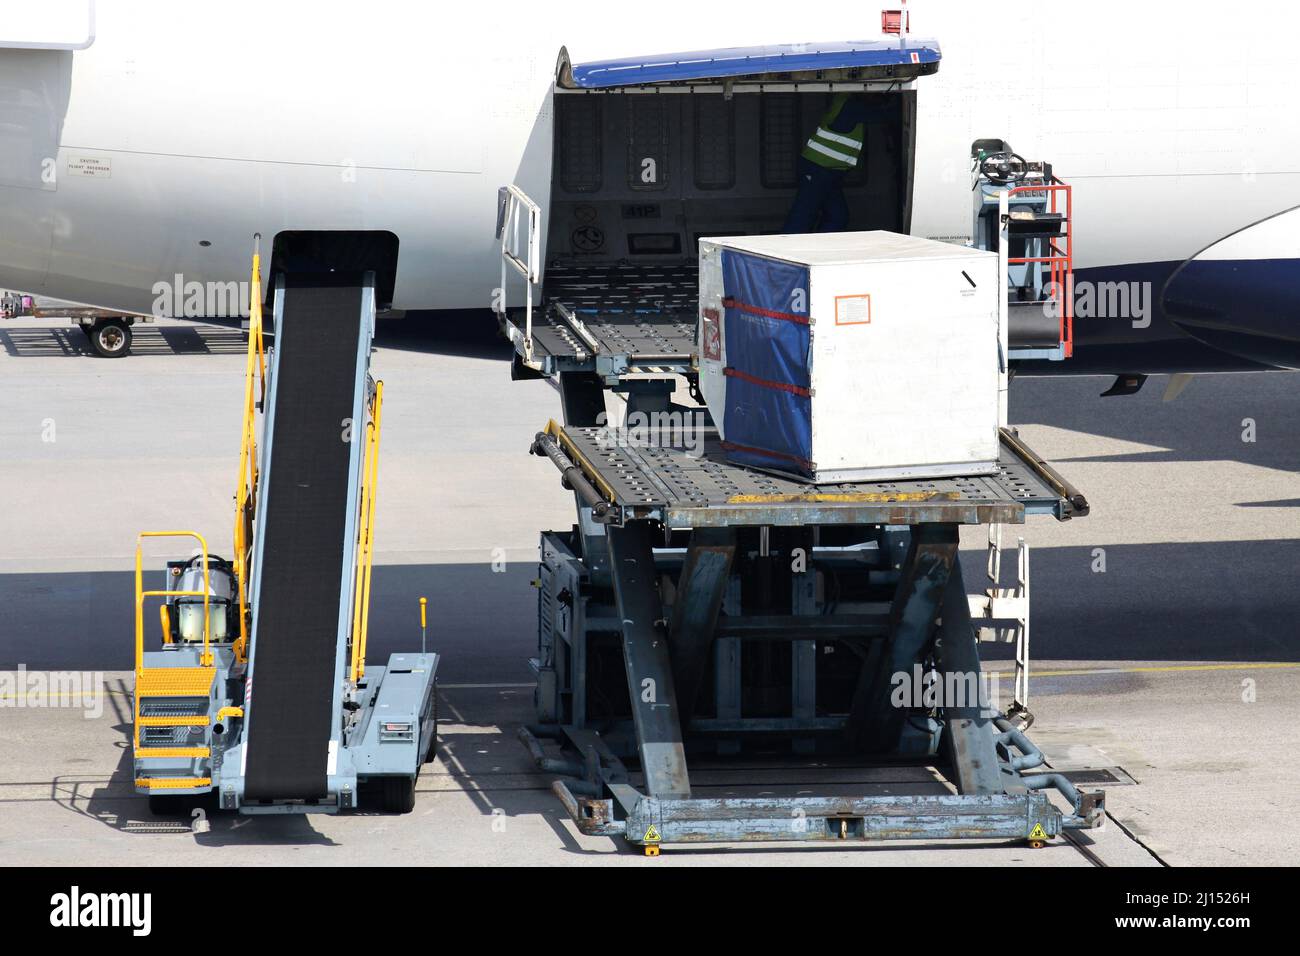 unit load devices being loaded into airliner at international airport Stock Photo